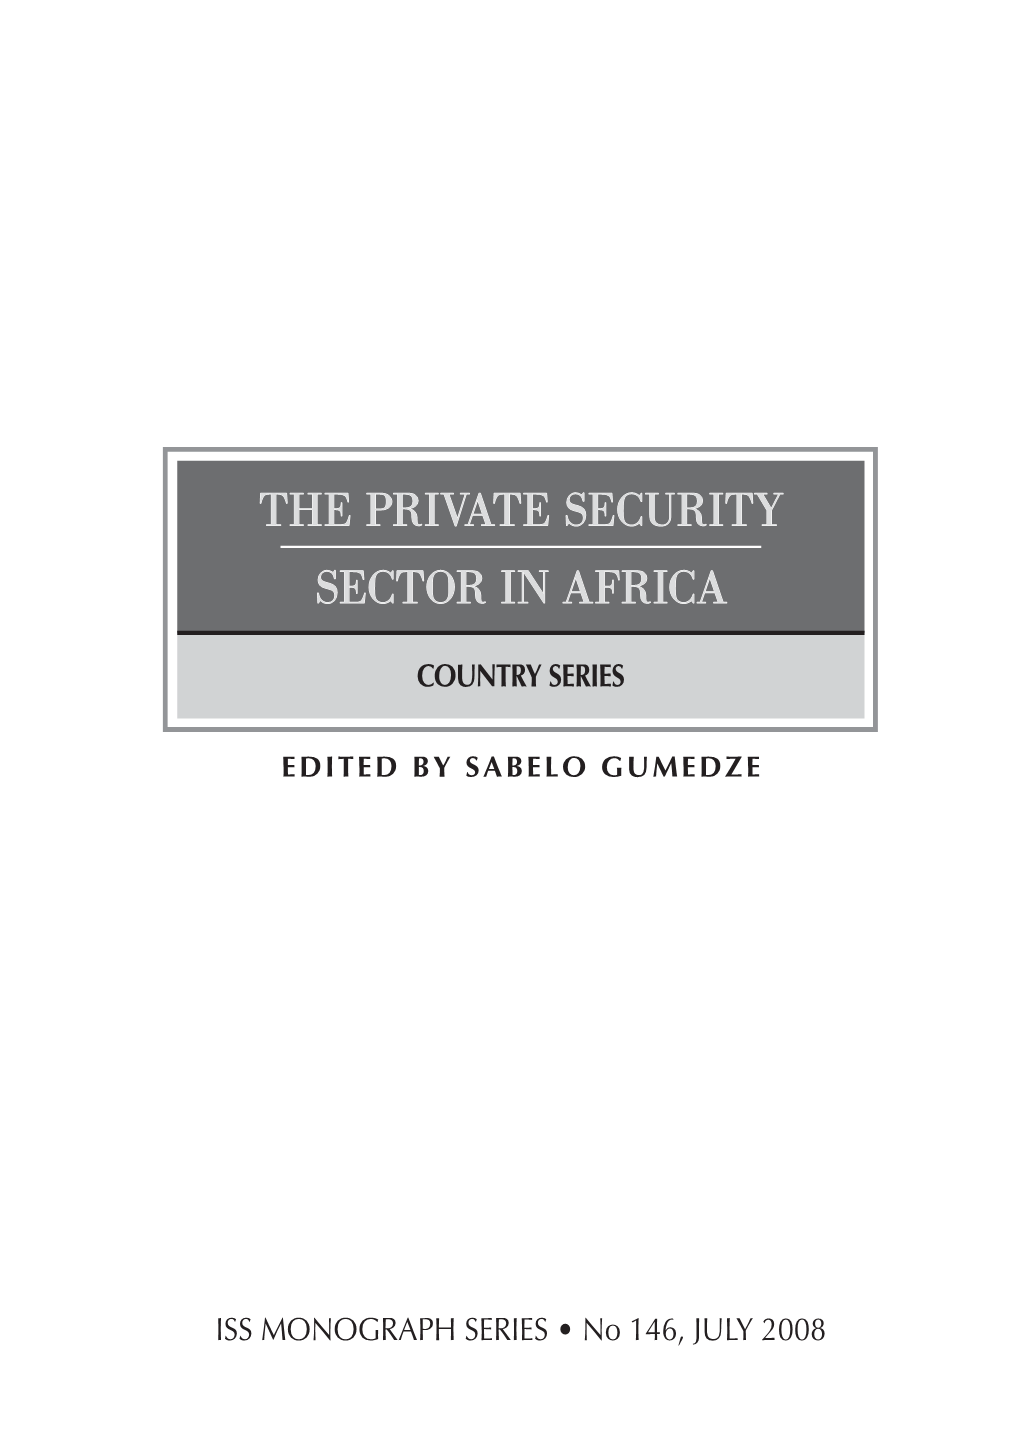 The Private Security Sector in Africa, of the Institute for Security Studies (ISS), Pretoria, South Africa